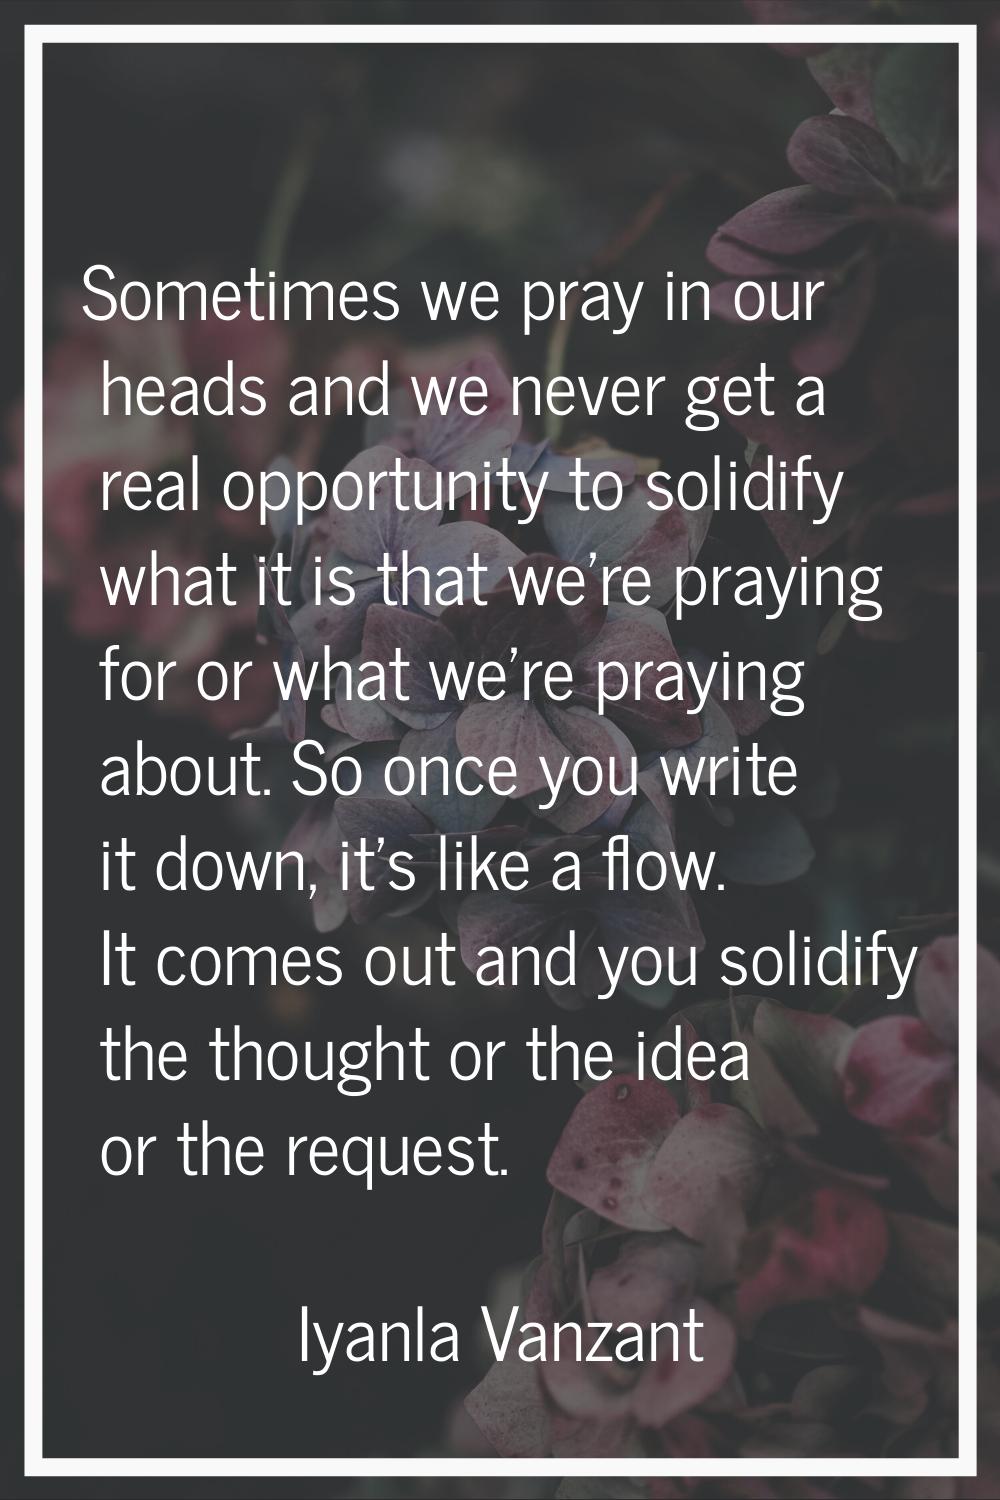 Sometimes we pray in our heads and we never get a real opportunity to solidify what it is that we'r